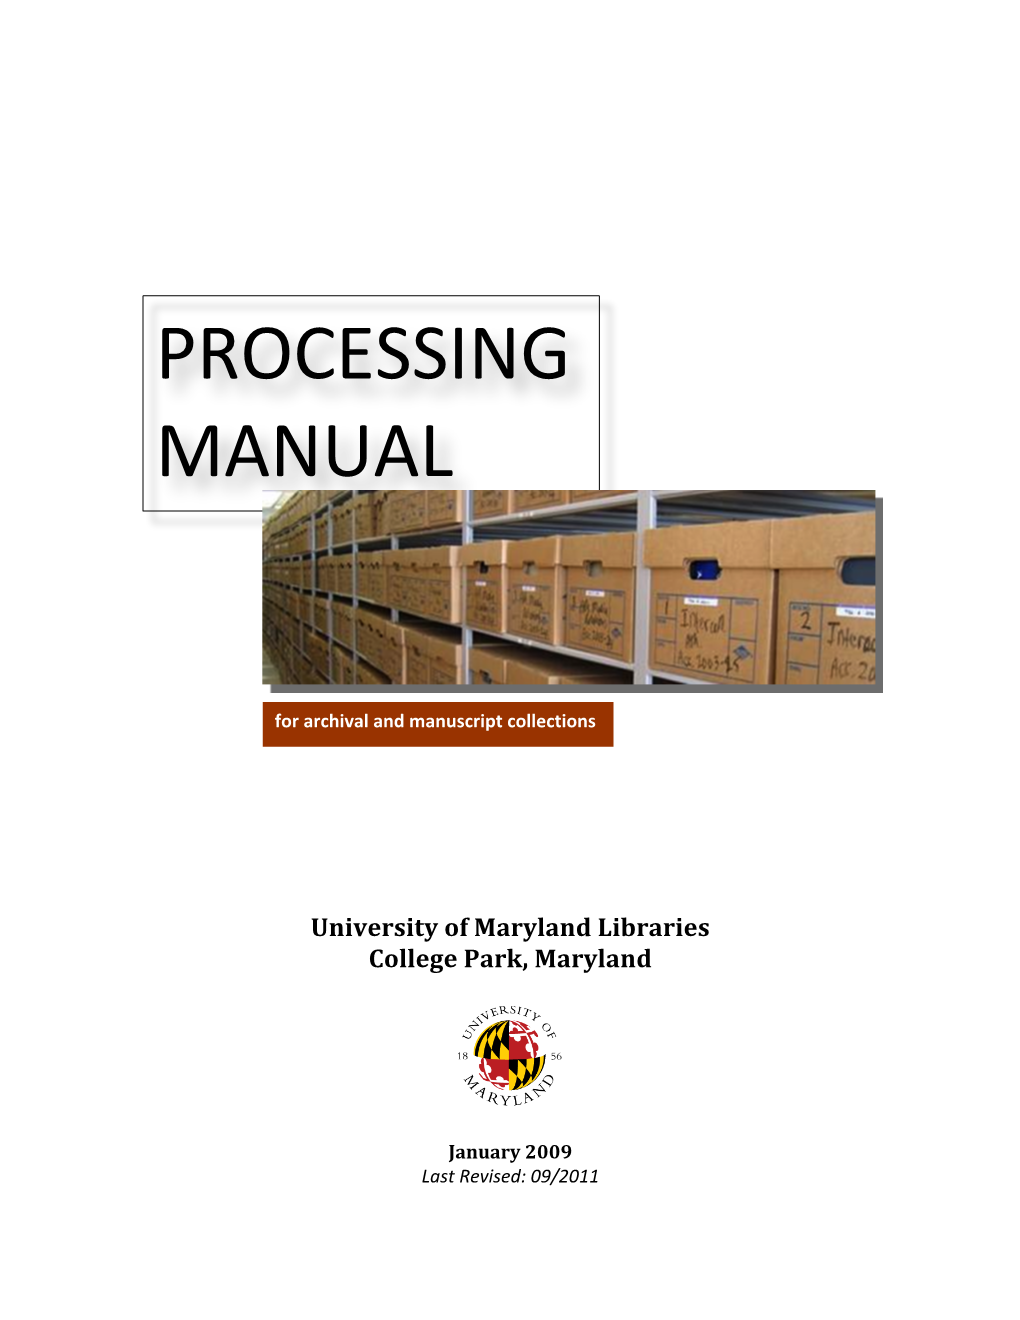 “Processing Manual” for Special Collections